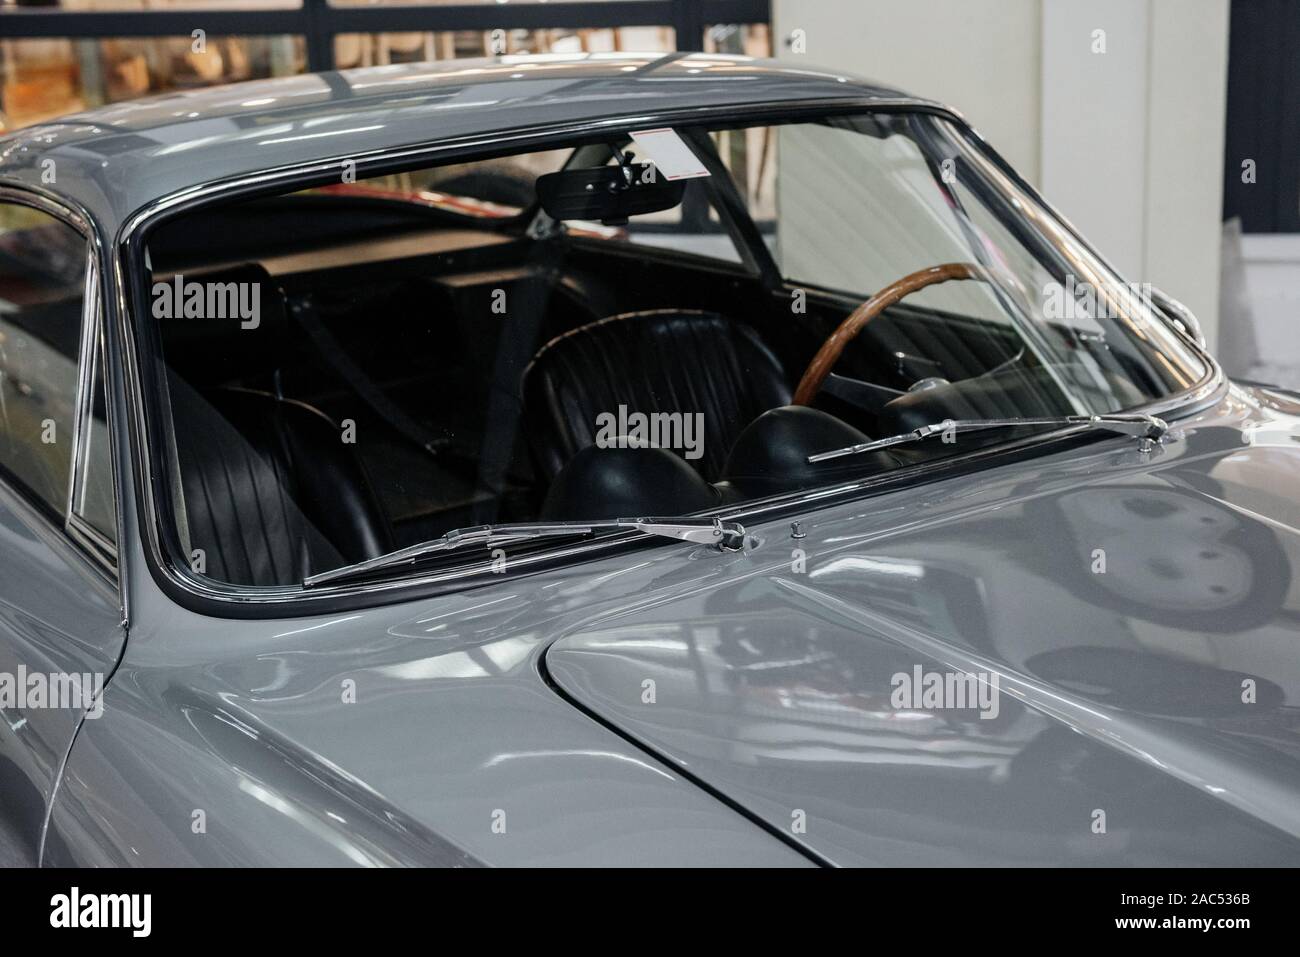 SINSHEIM, GERMANY - OCTOBER 16, 2018: Technik Museum. Hood and top. Particle view of the silver colored luxury car that stands indoors at exhibition Stock Photo